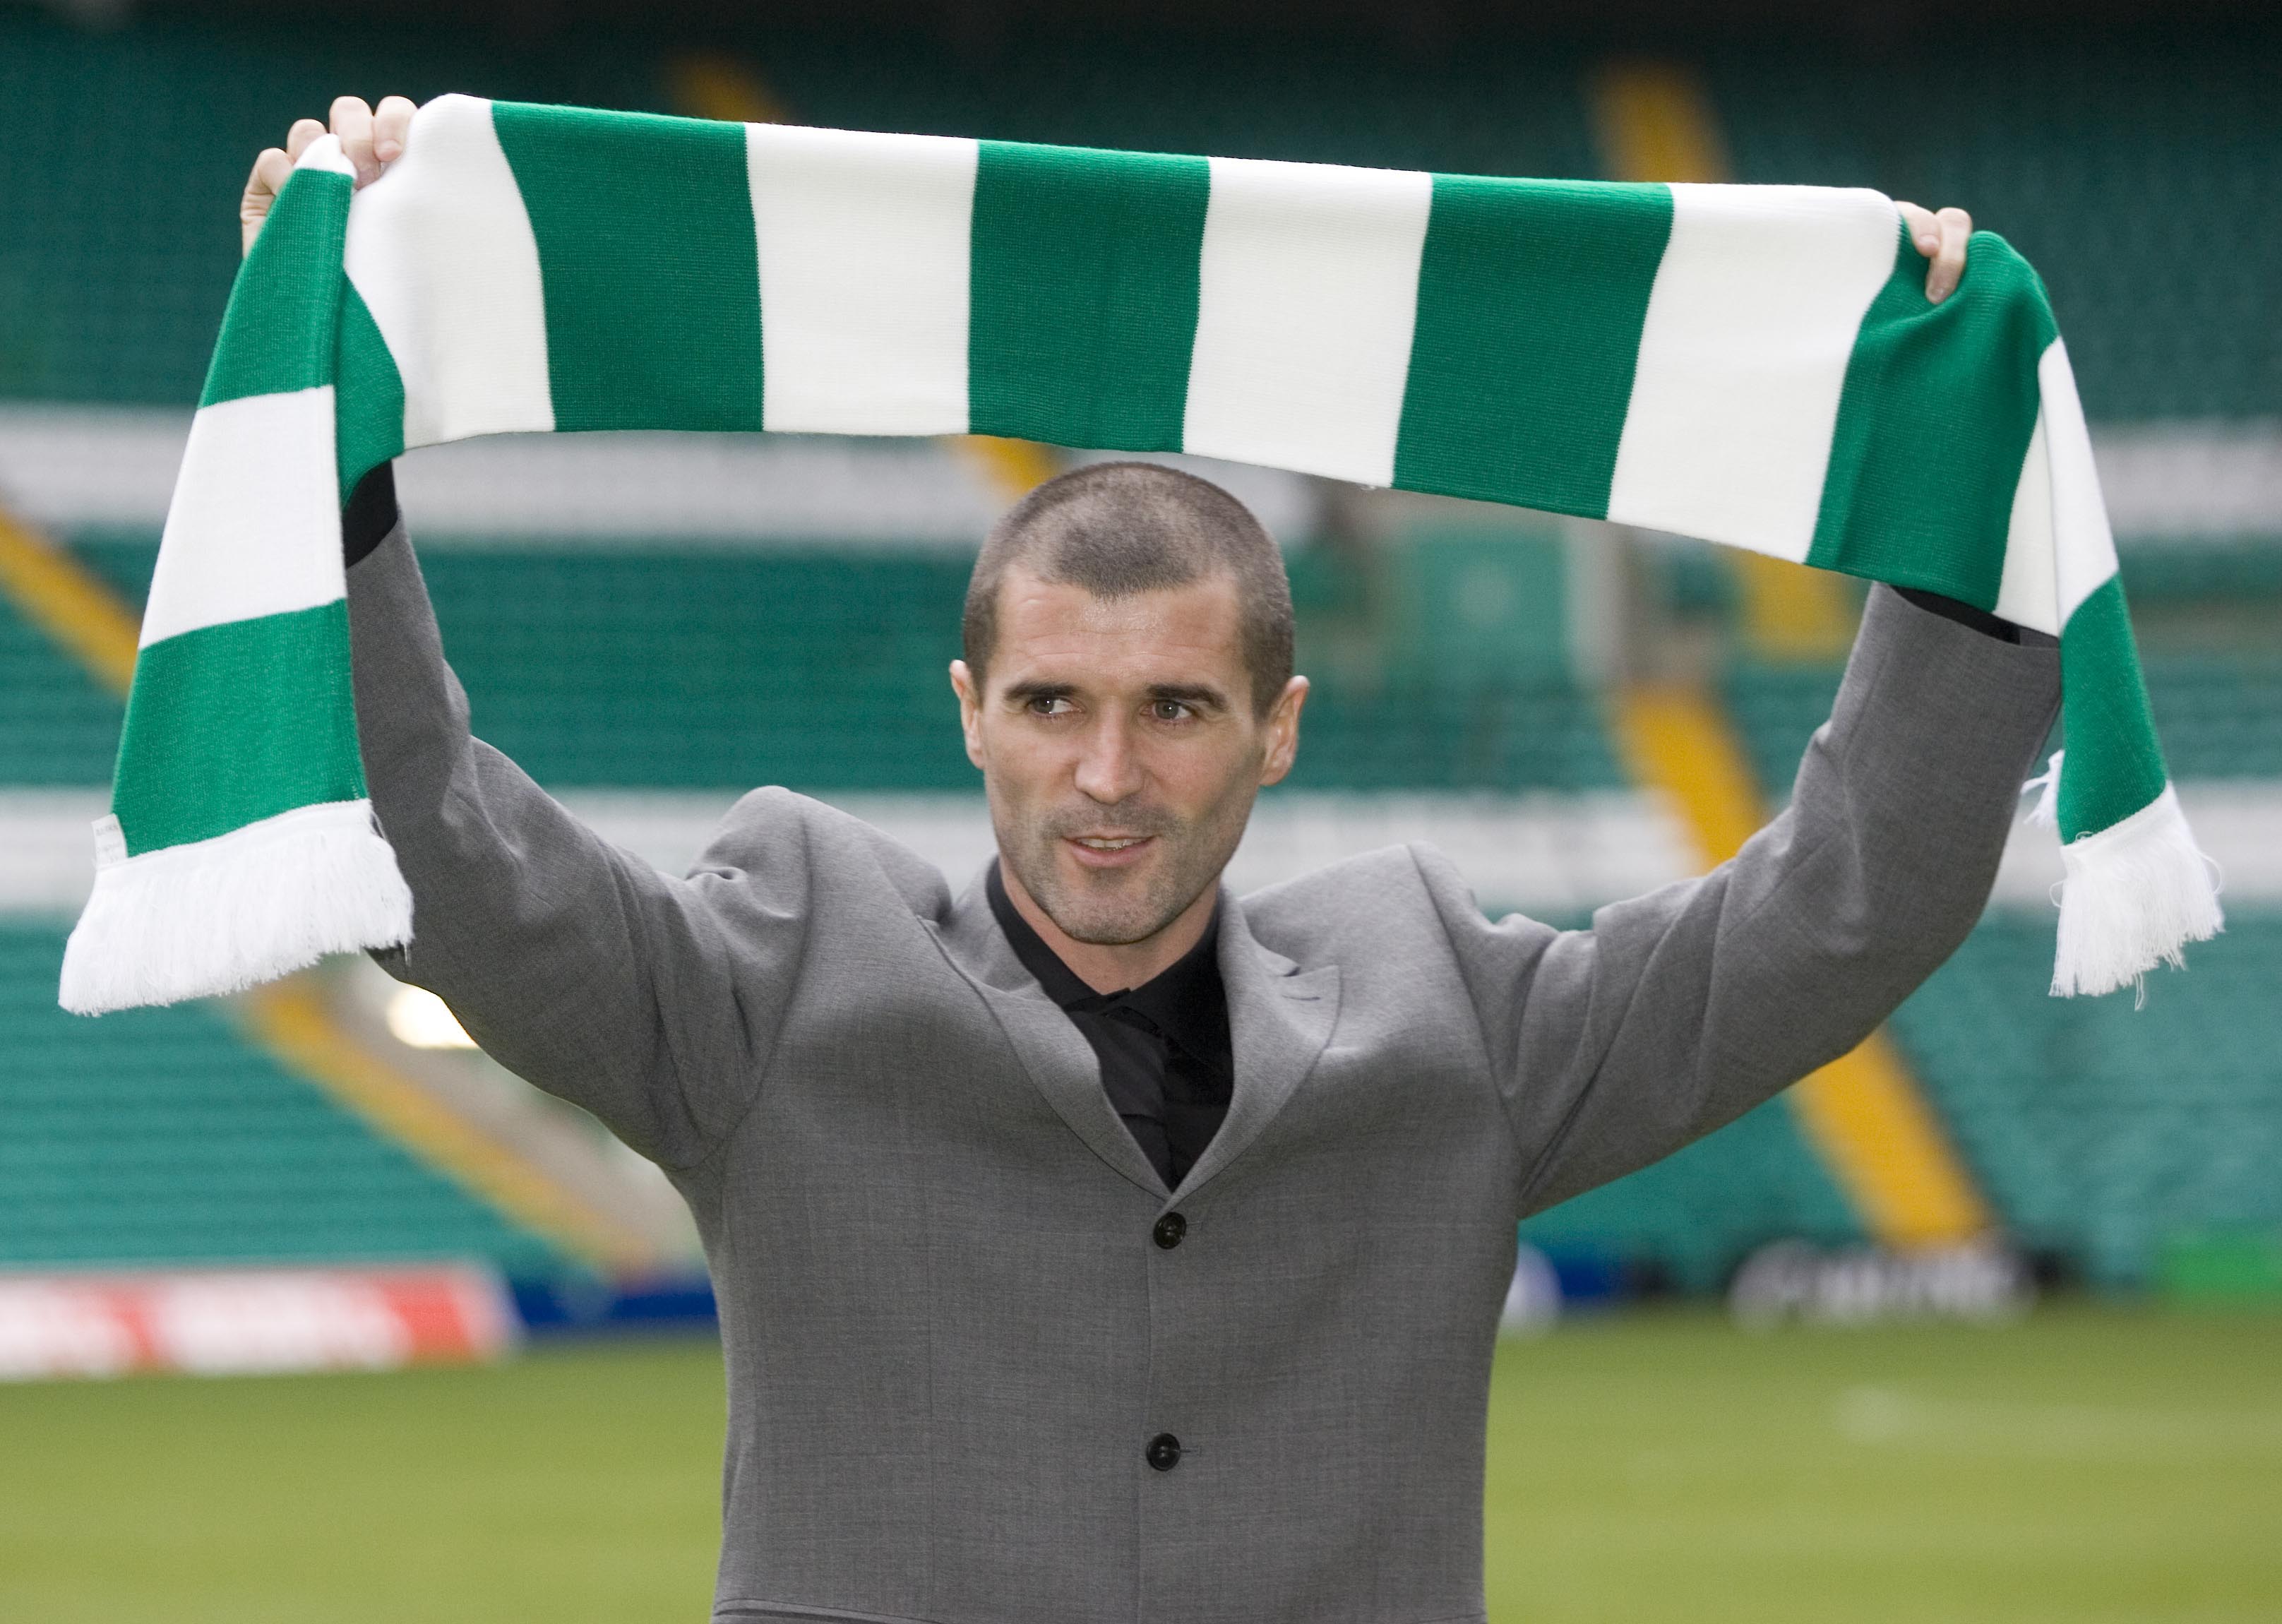 Former Celtic player Roy Keane was one of the early candidates.